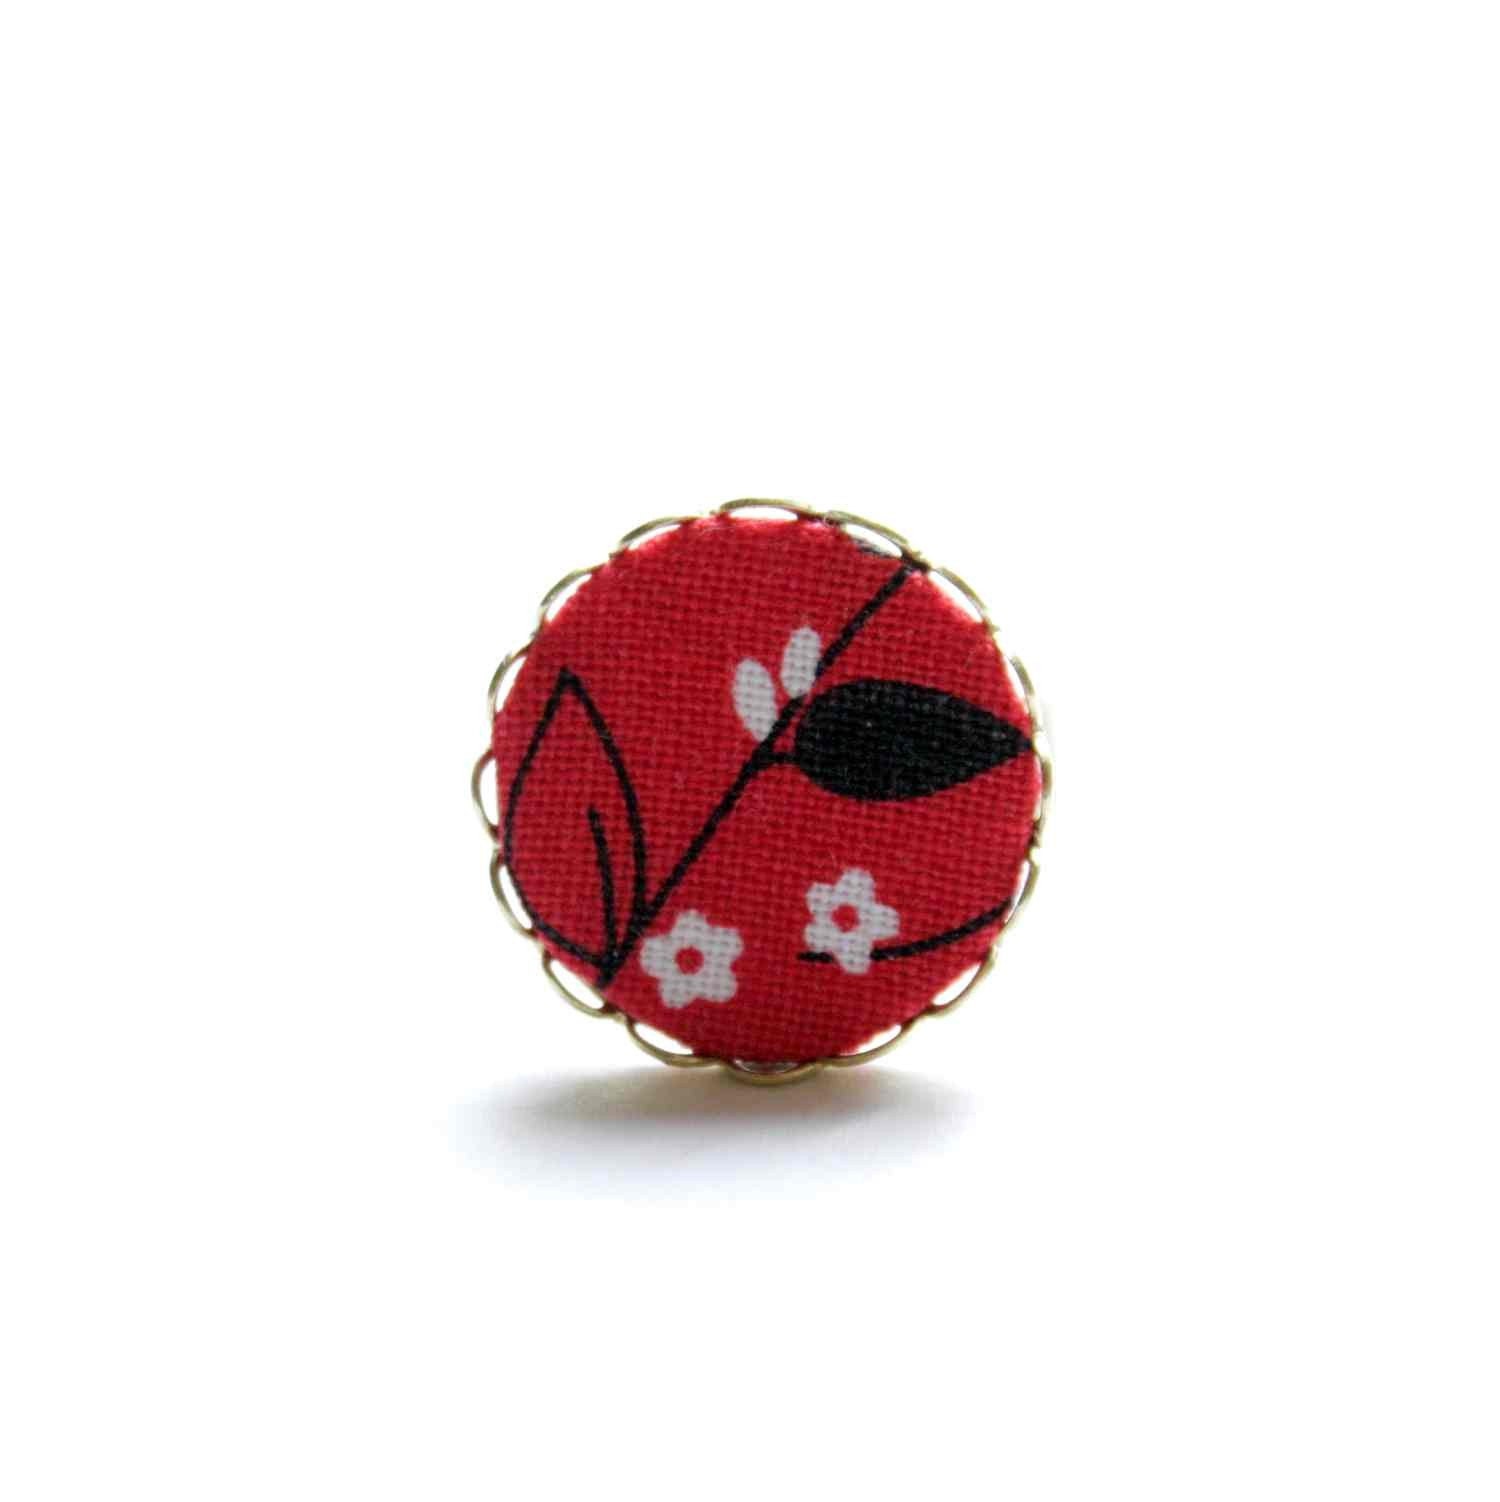 Bloom ring  - gold plated metal ring with fabric